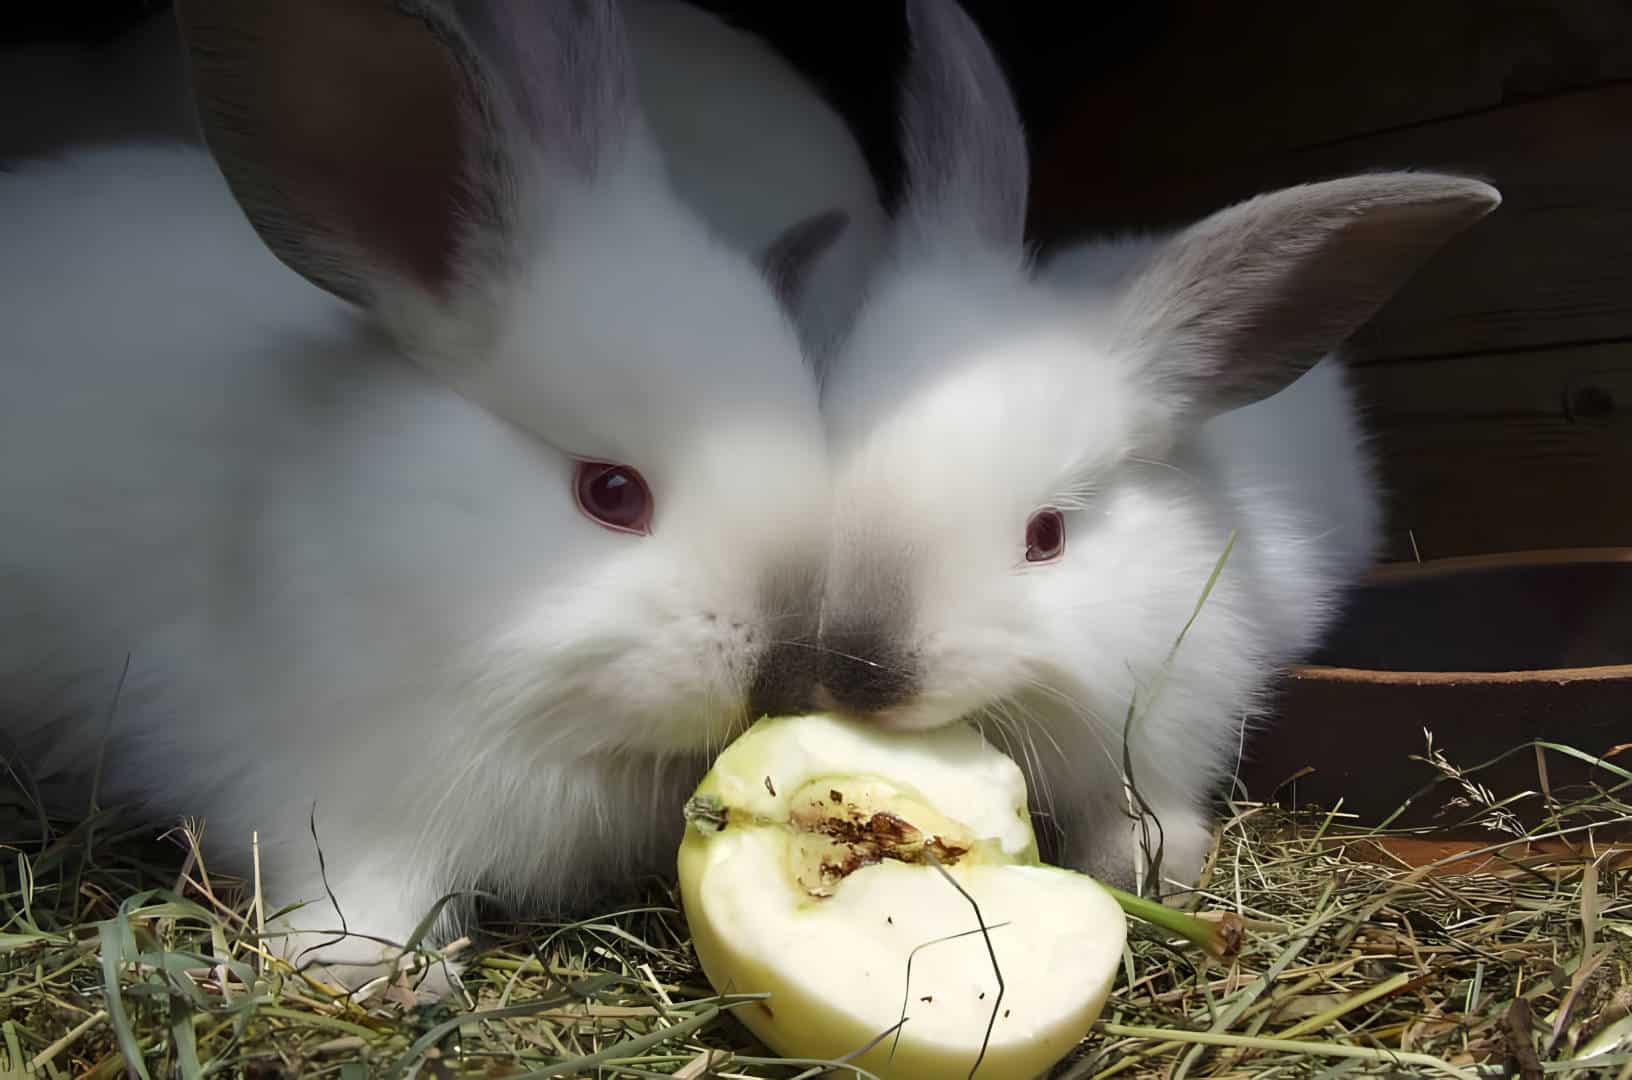 Tips for feeding apples to your rabbit